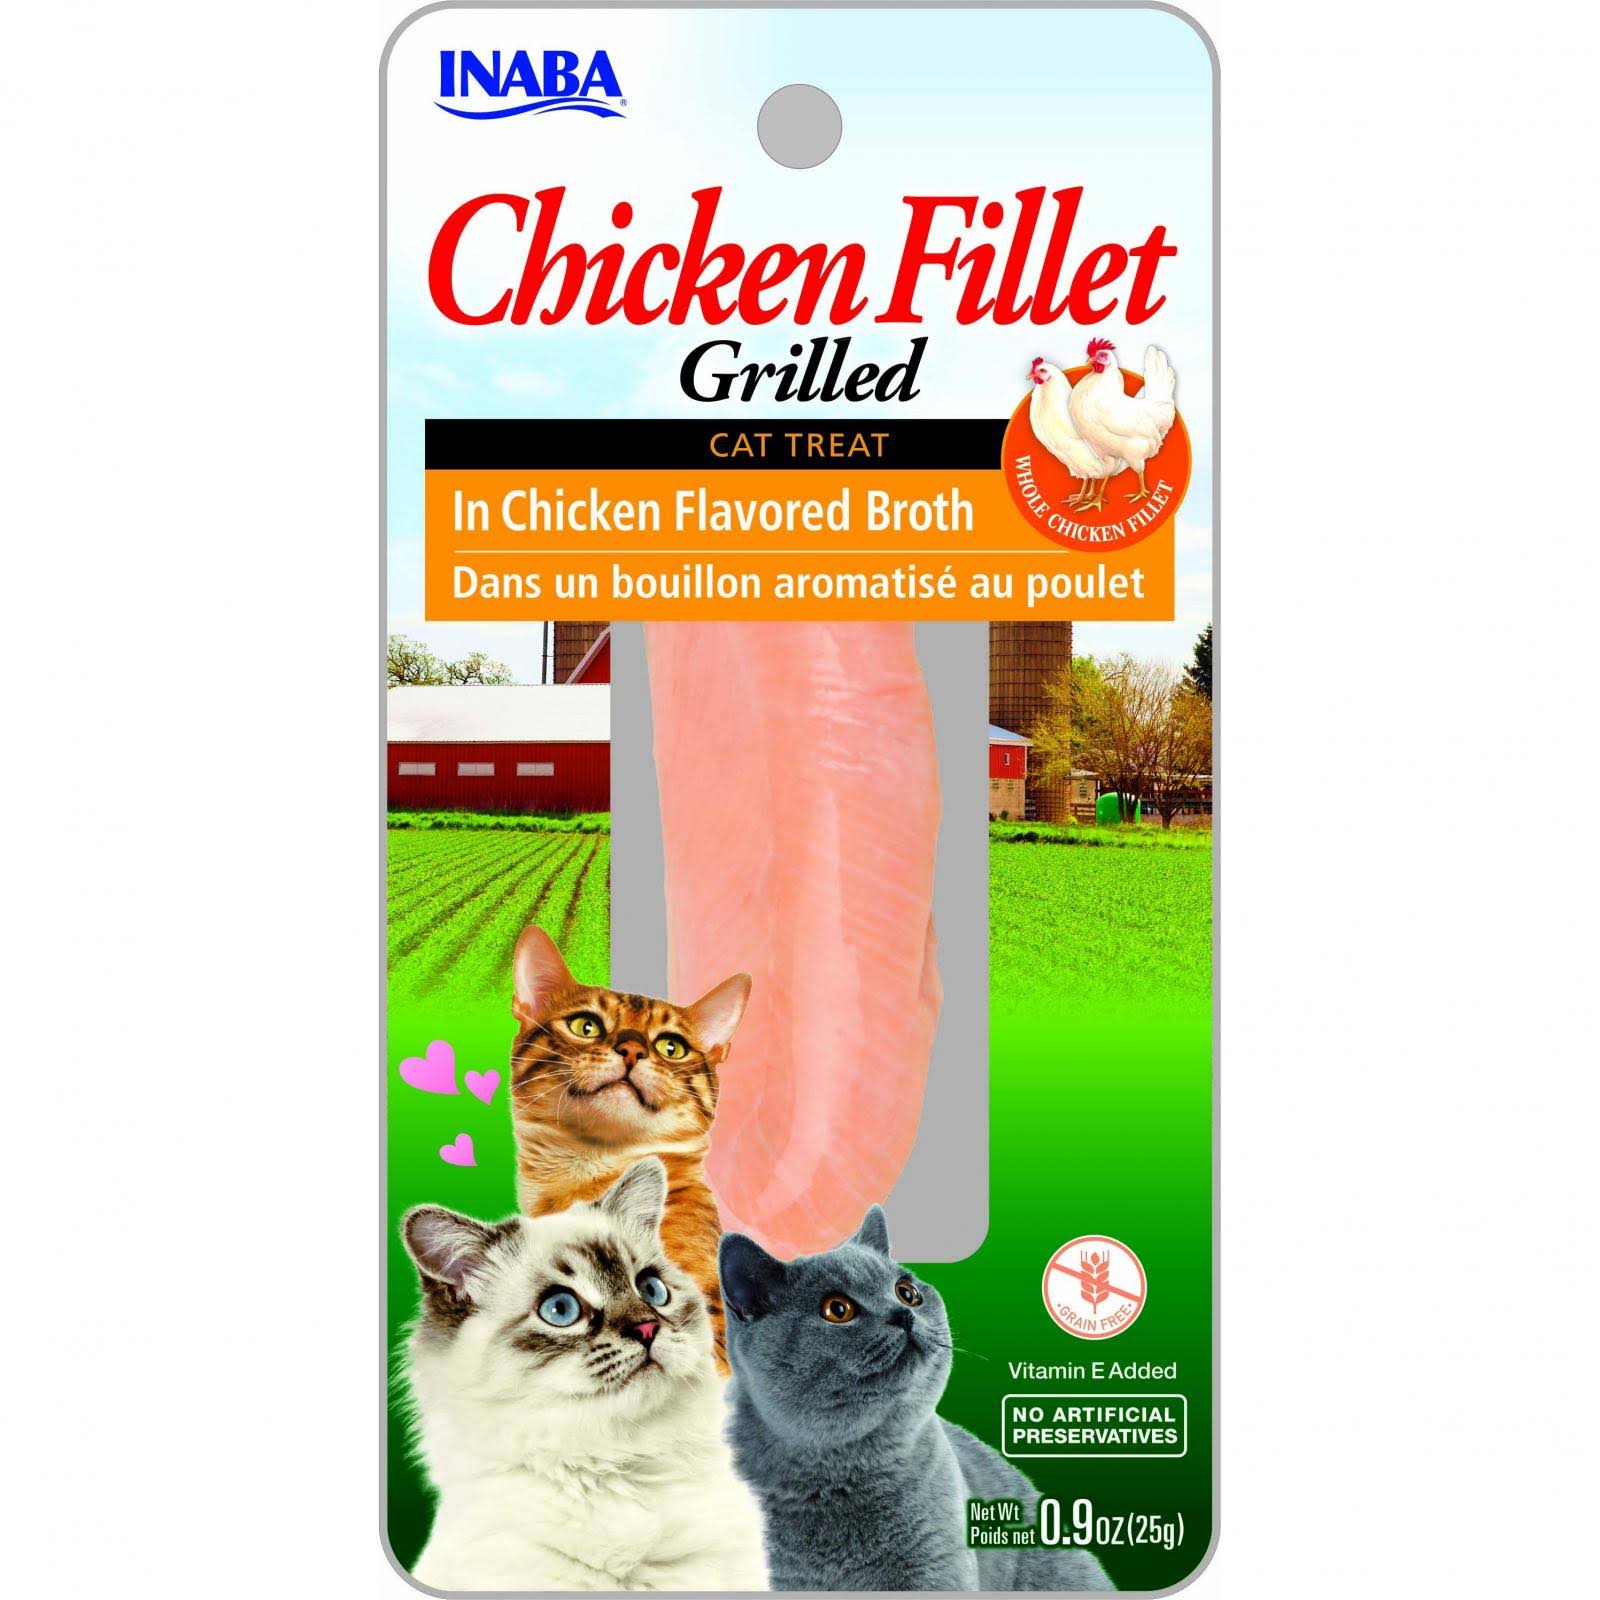 Inaba Chicken Fillet Grilled Cat Treat Extra Tender in Crab Broth 25g